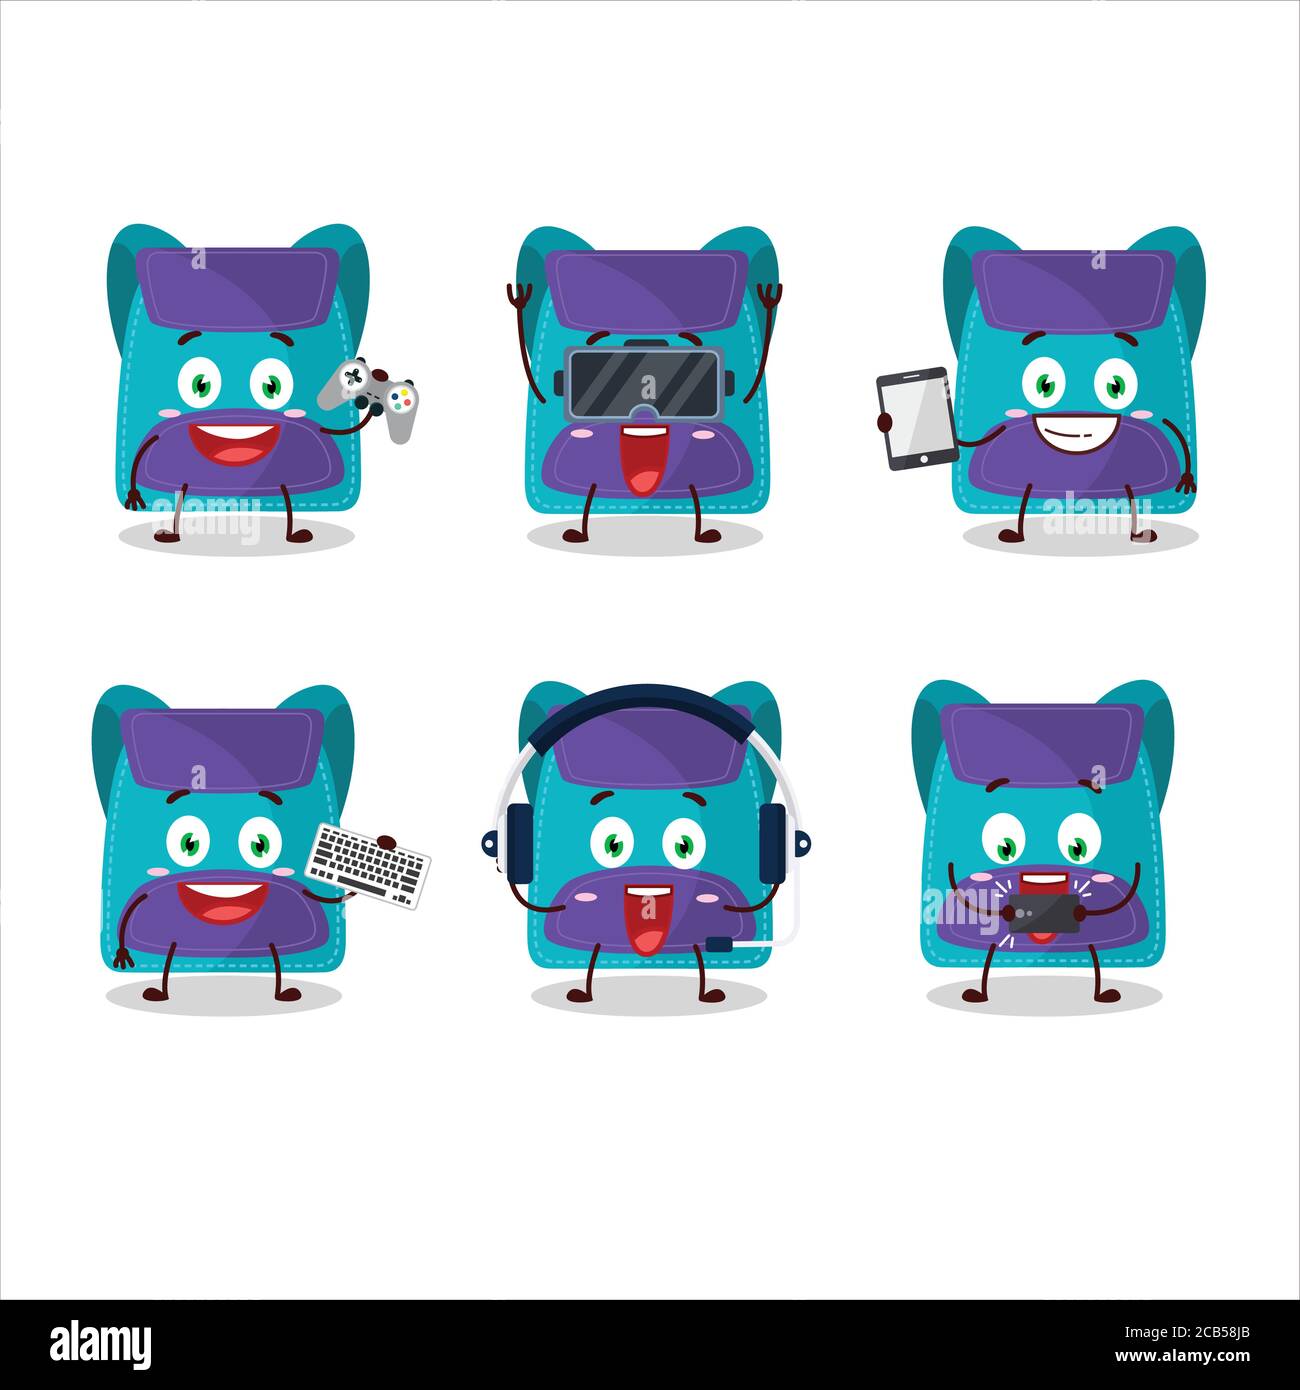 Blue bag cartoon character are playing games with various cute emoticons Stock Vector